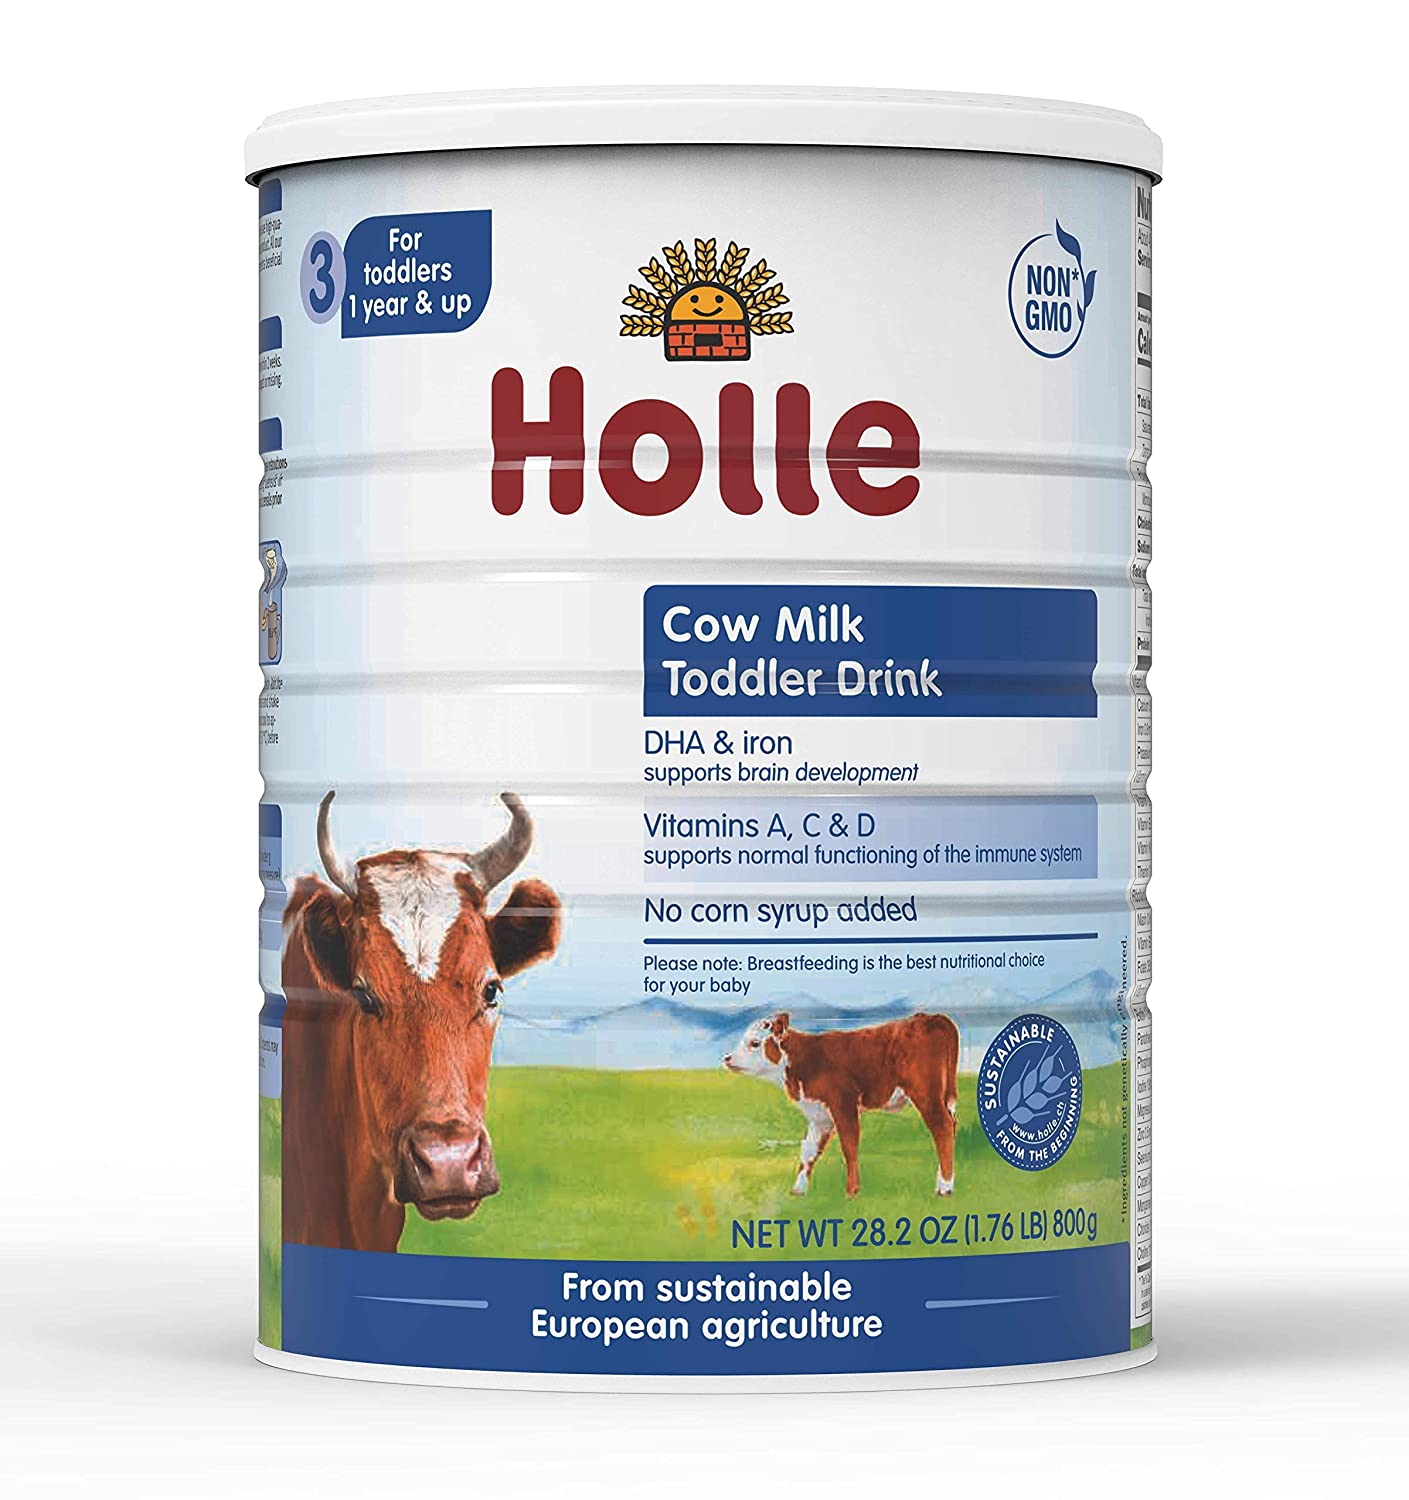 Holle Non-GMO European Whole Milk Toddler Drink with DHA for Healthy Brain Development 1 Year & Up